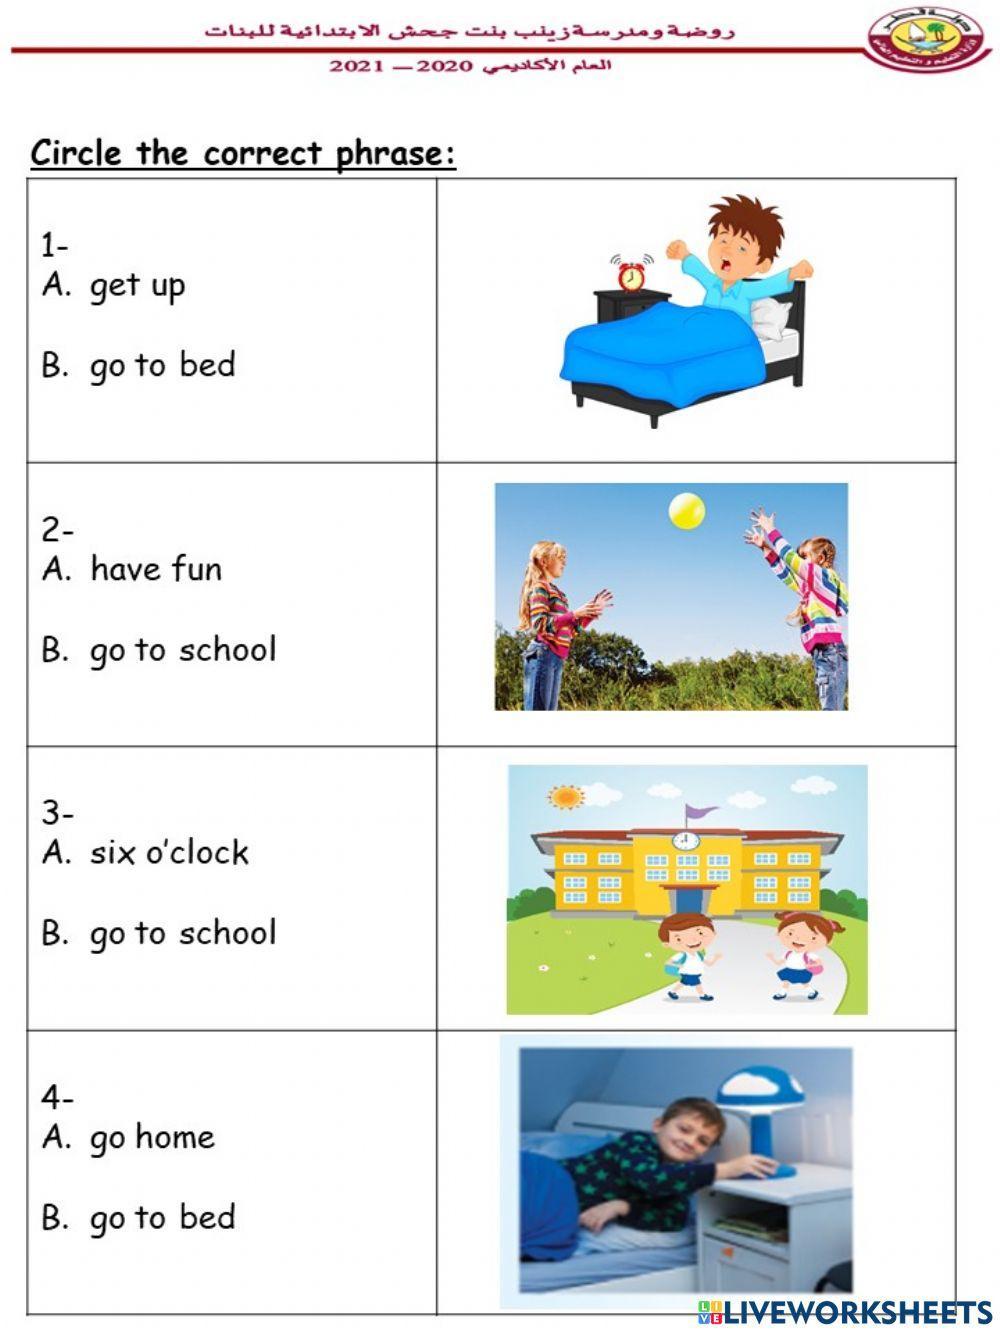 Read and choose the correct word